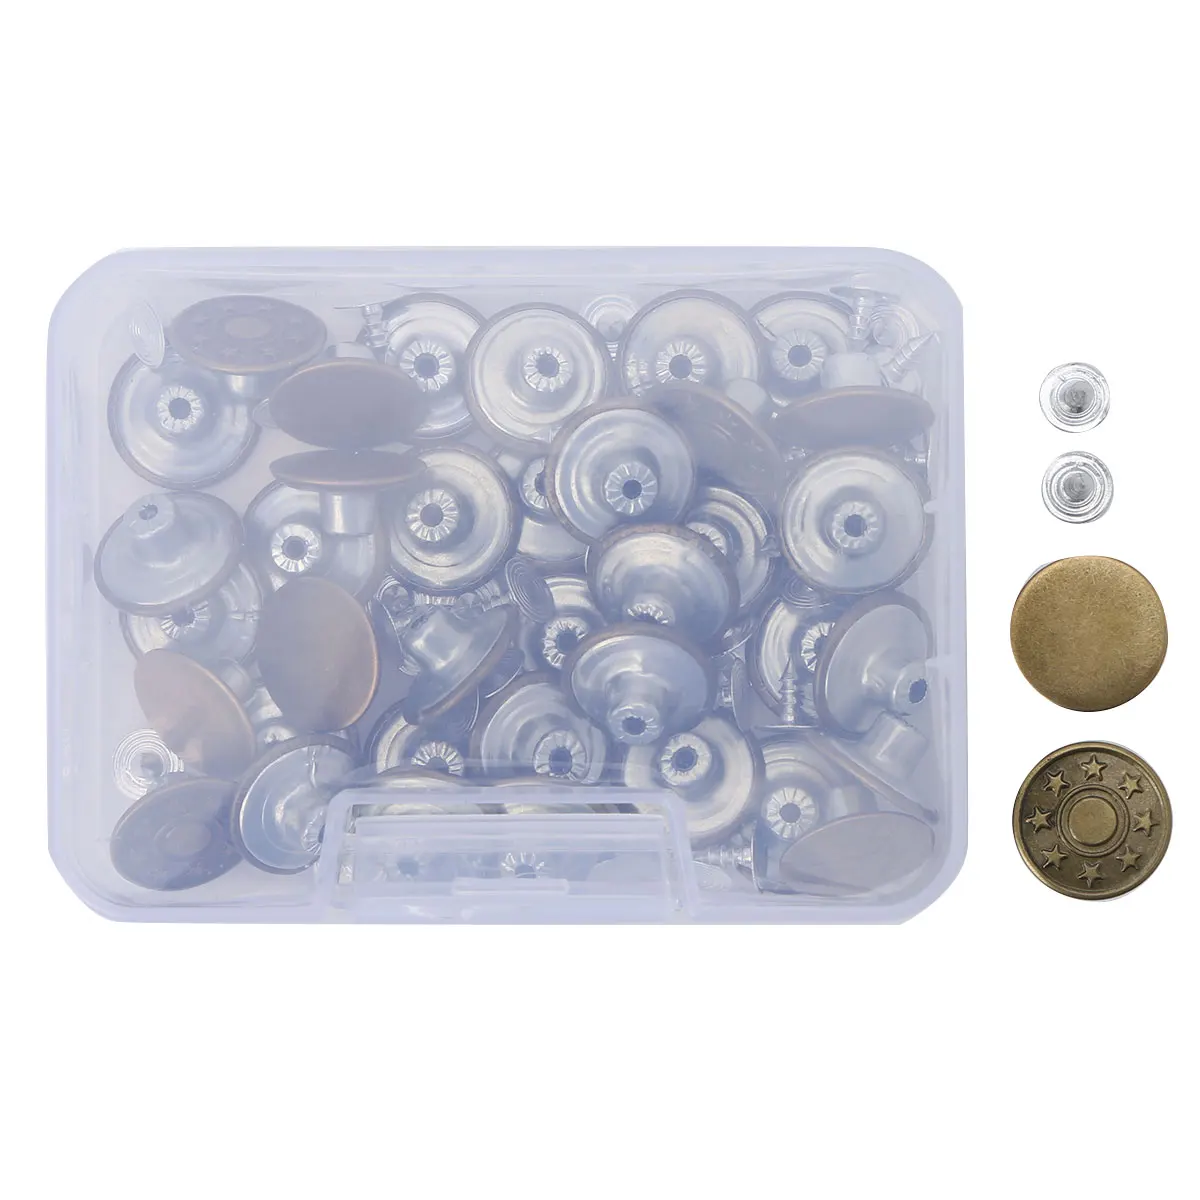 40 Sets Metal Denim Jeans Tack Snap Buttons Rivets For Repair  Replacement+Box